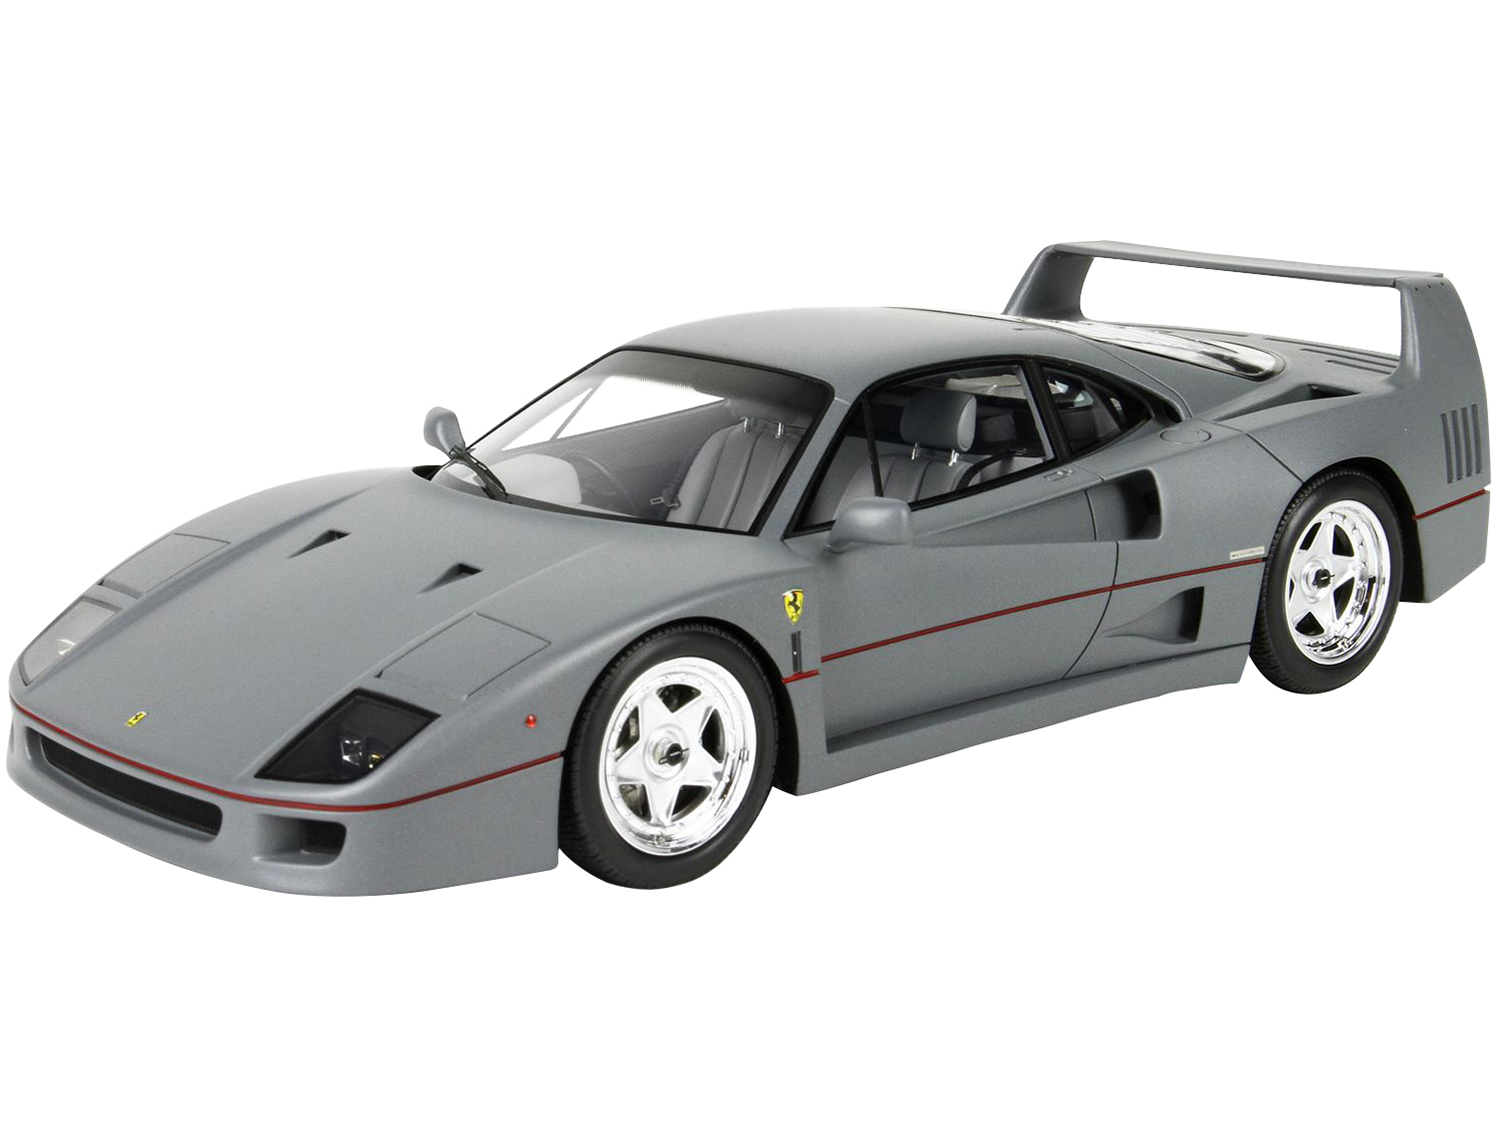 Image of Ferrari F40 Sultan of Brunei Gun Metal Gray with Red Stripes with DISPLAY CASE Limited Edition to 200 pieces Worldwide 1/18 Model Car by BBR